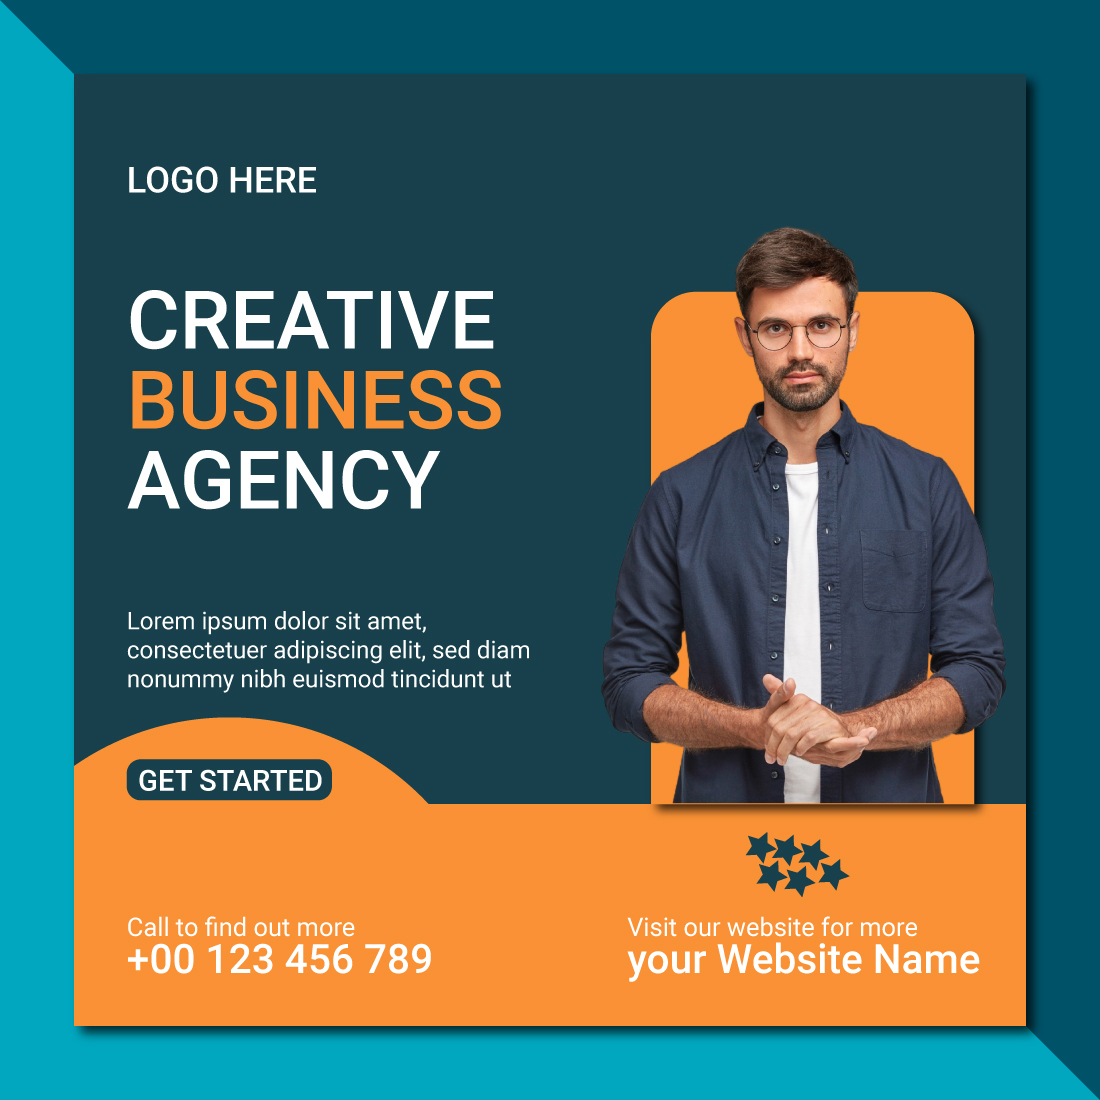 Creative Business Agency Social Media Post Template cover image.